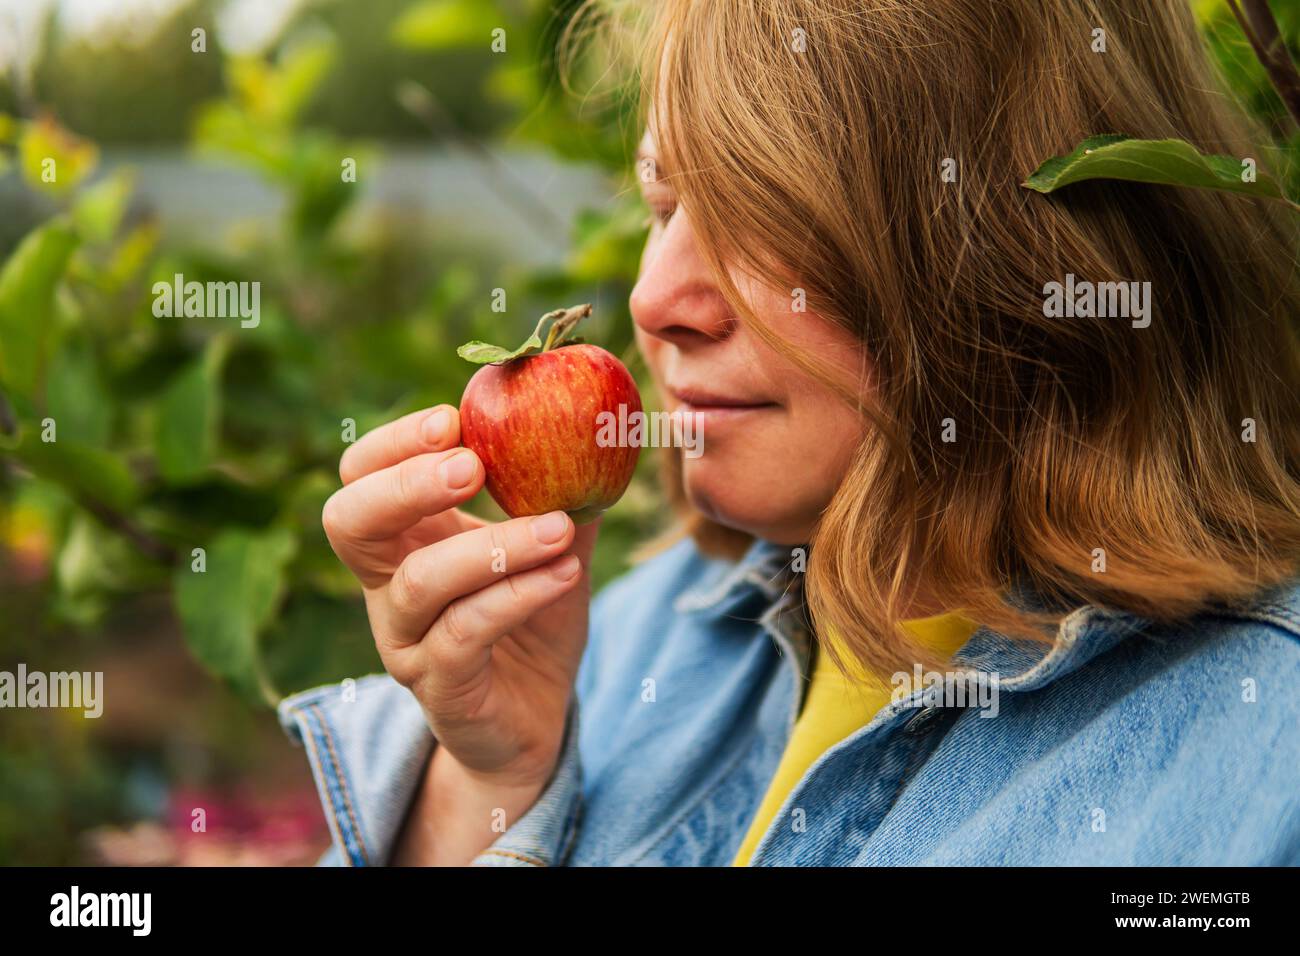 Woman harvesting apples in orchard Stock Photo